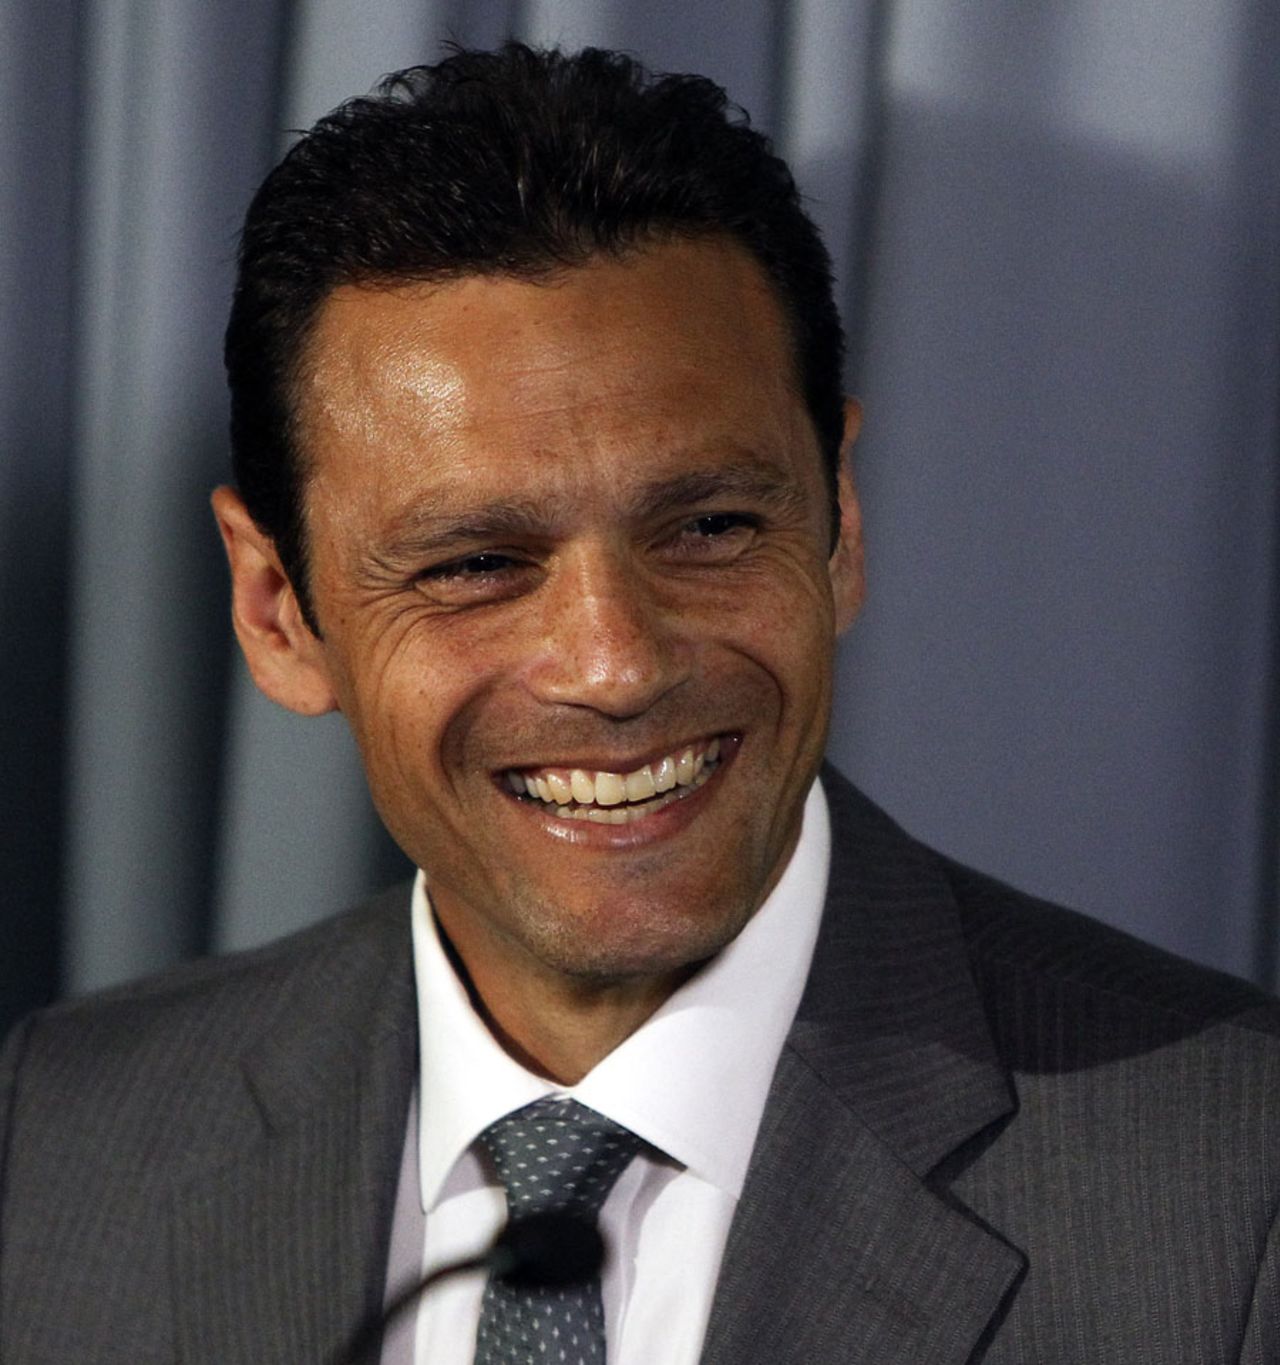 Mark Ramprakash speaks at a press conference to announce his retirement, The Oval, July 5, 2012